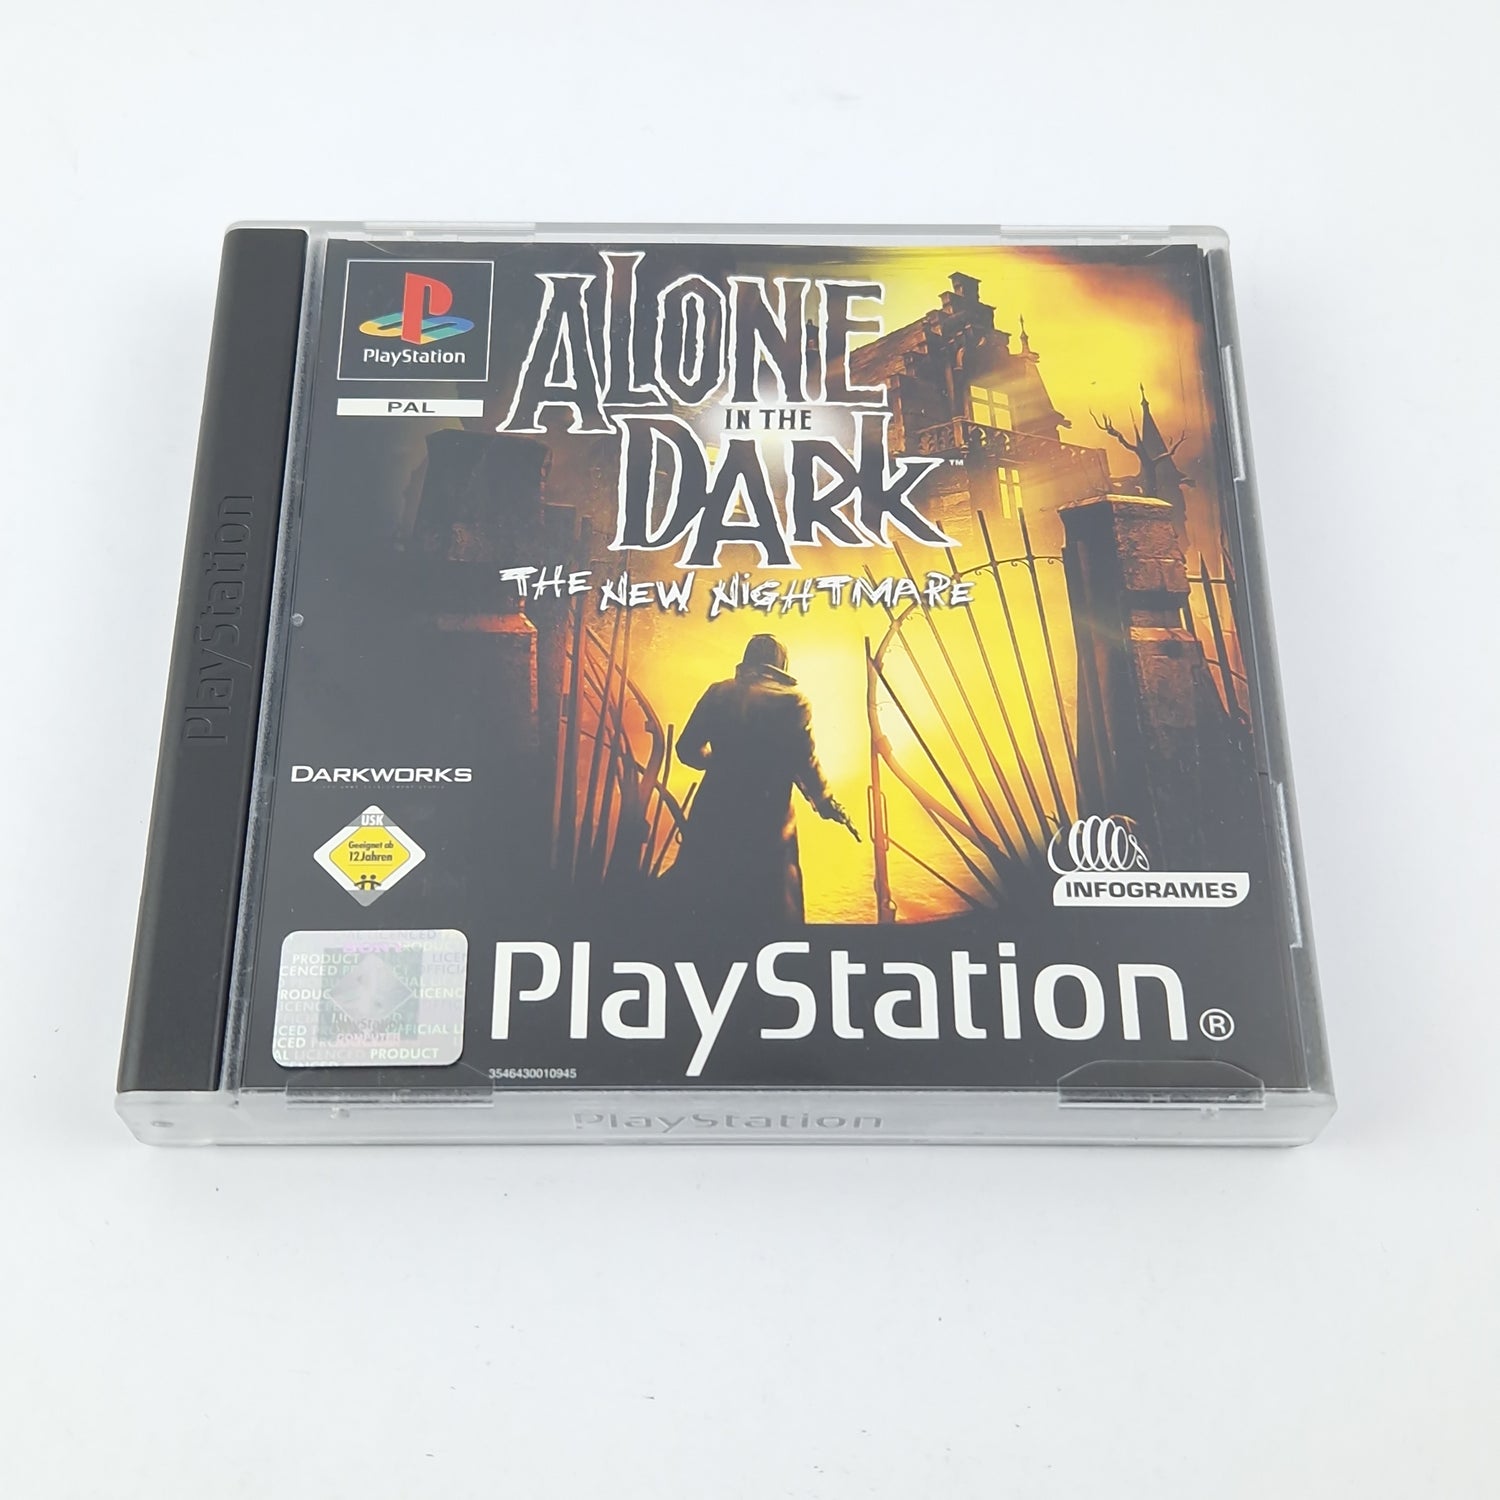 Playstation 1 game: Alone in the Dark - OVP instructions CD / SONY PS1 PSX PAL